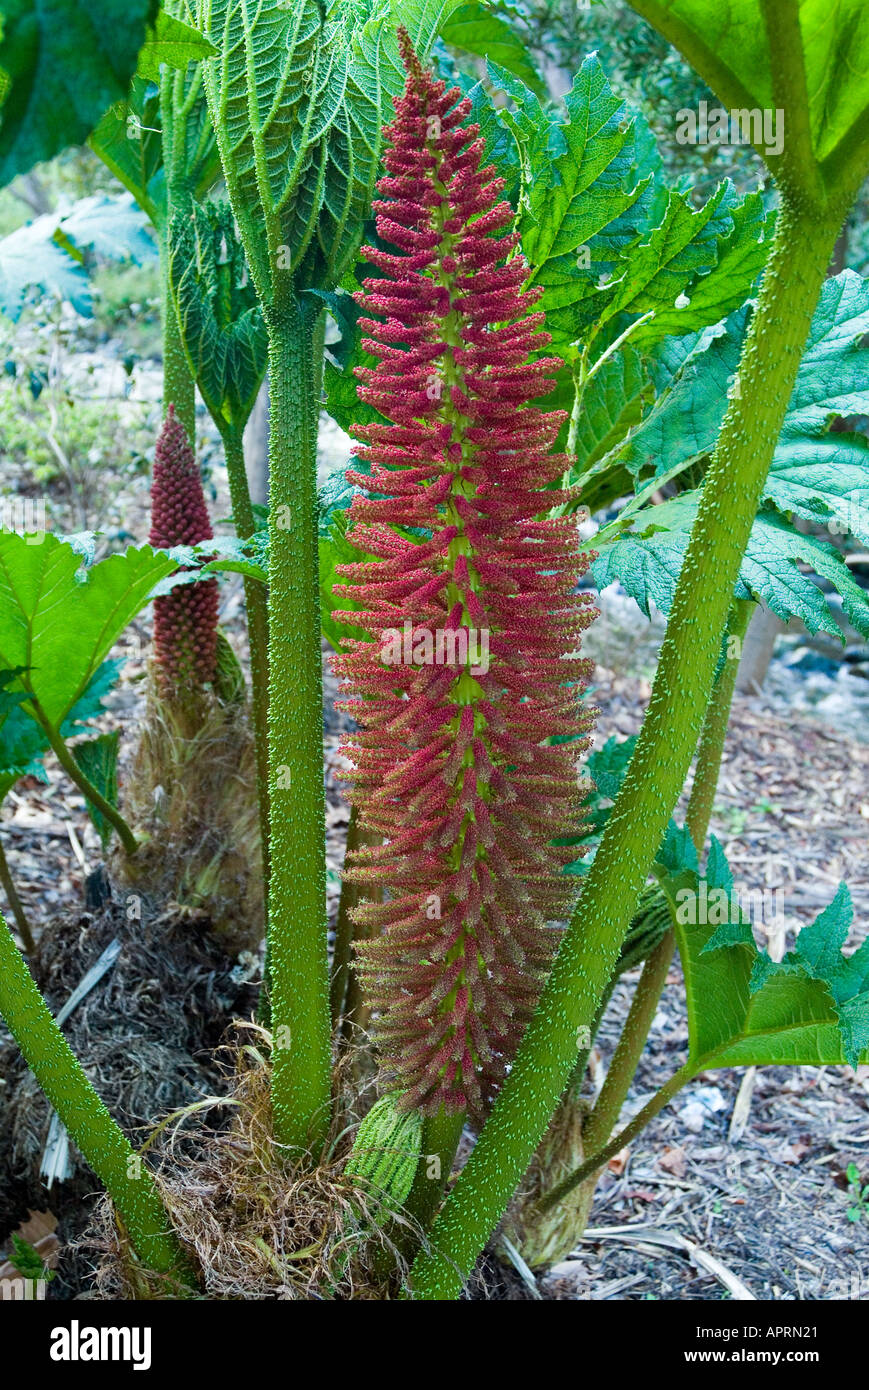 Flower of the Gunnera magellanica a giant native plant of the Andes it grows to a height of 2 metres with a spread of 2 metres Stock Photo